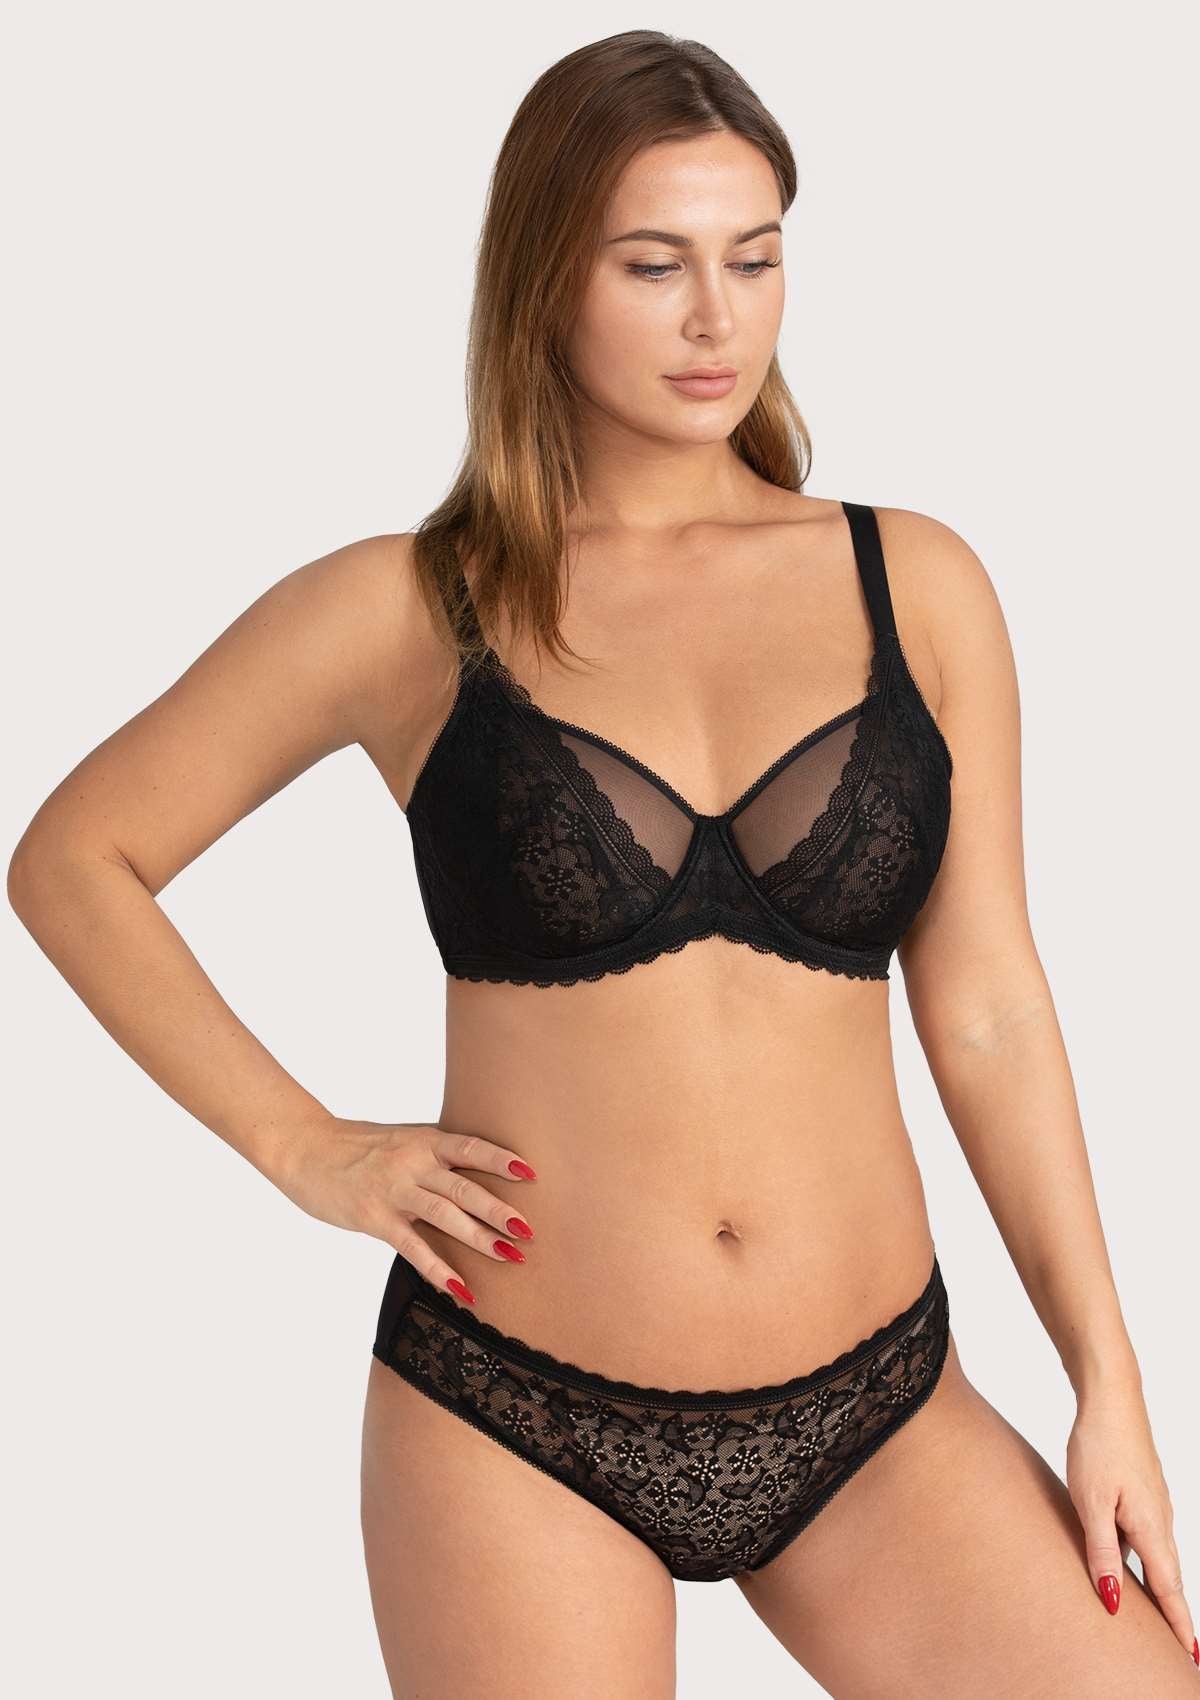 HSIA Anemone Lace Bra And Panties: Back Support Wired Bra - Black / 42 / C